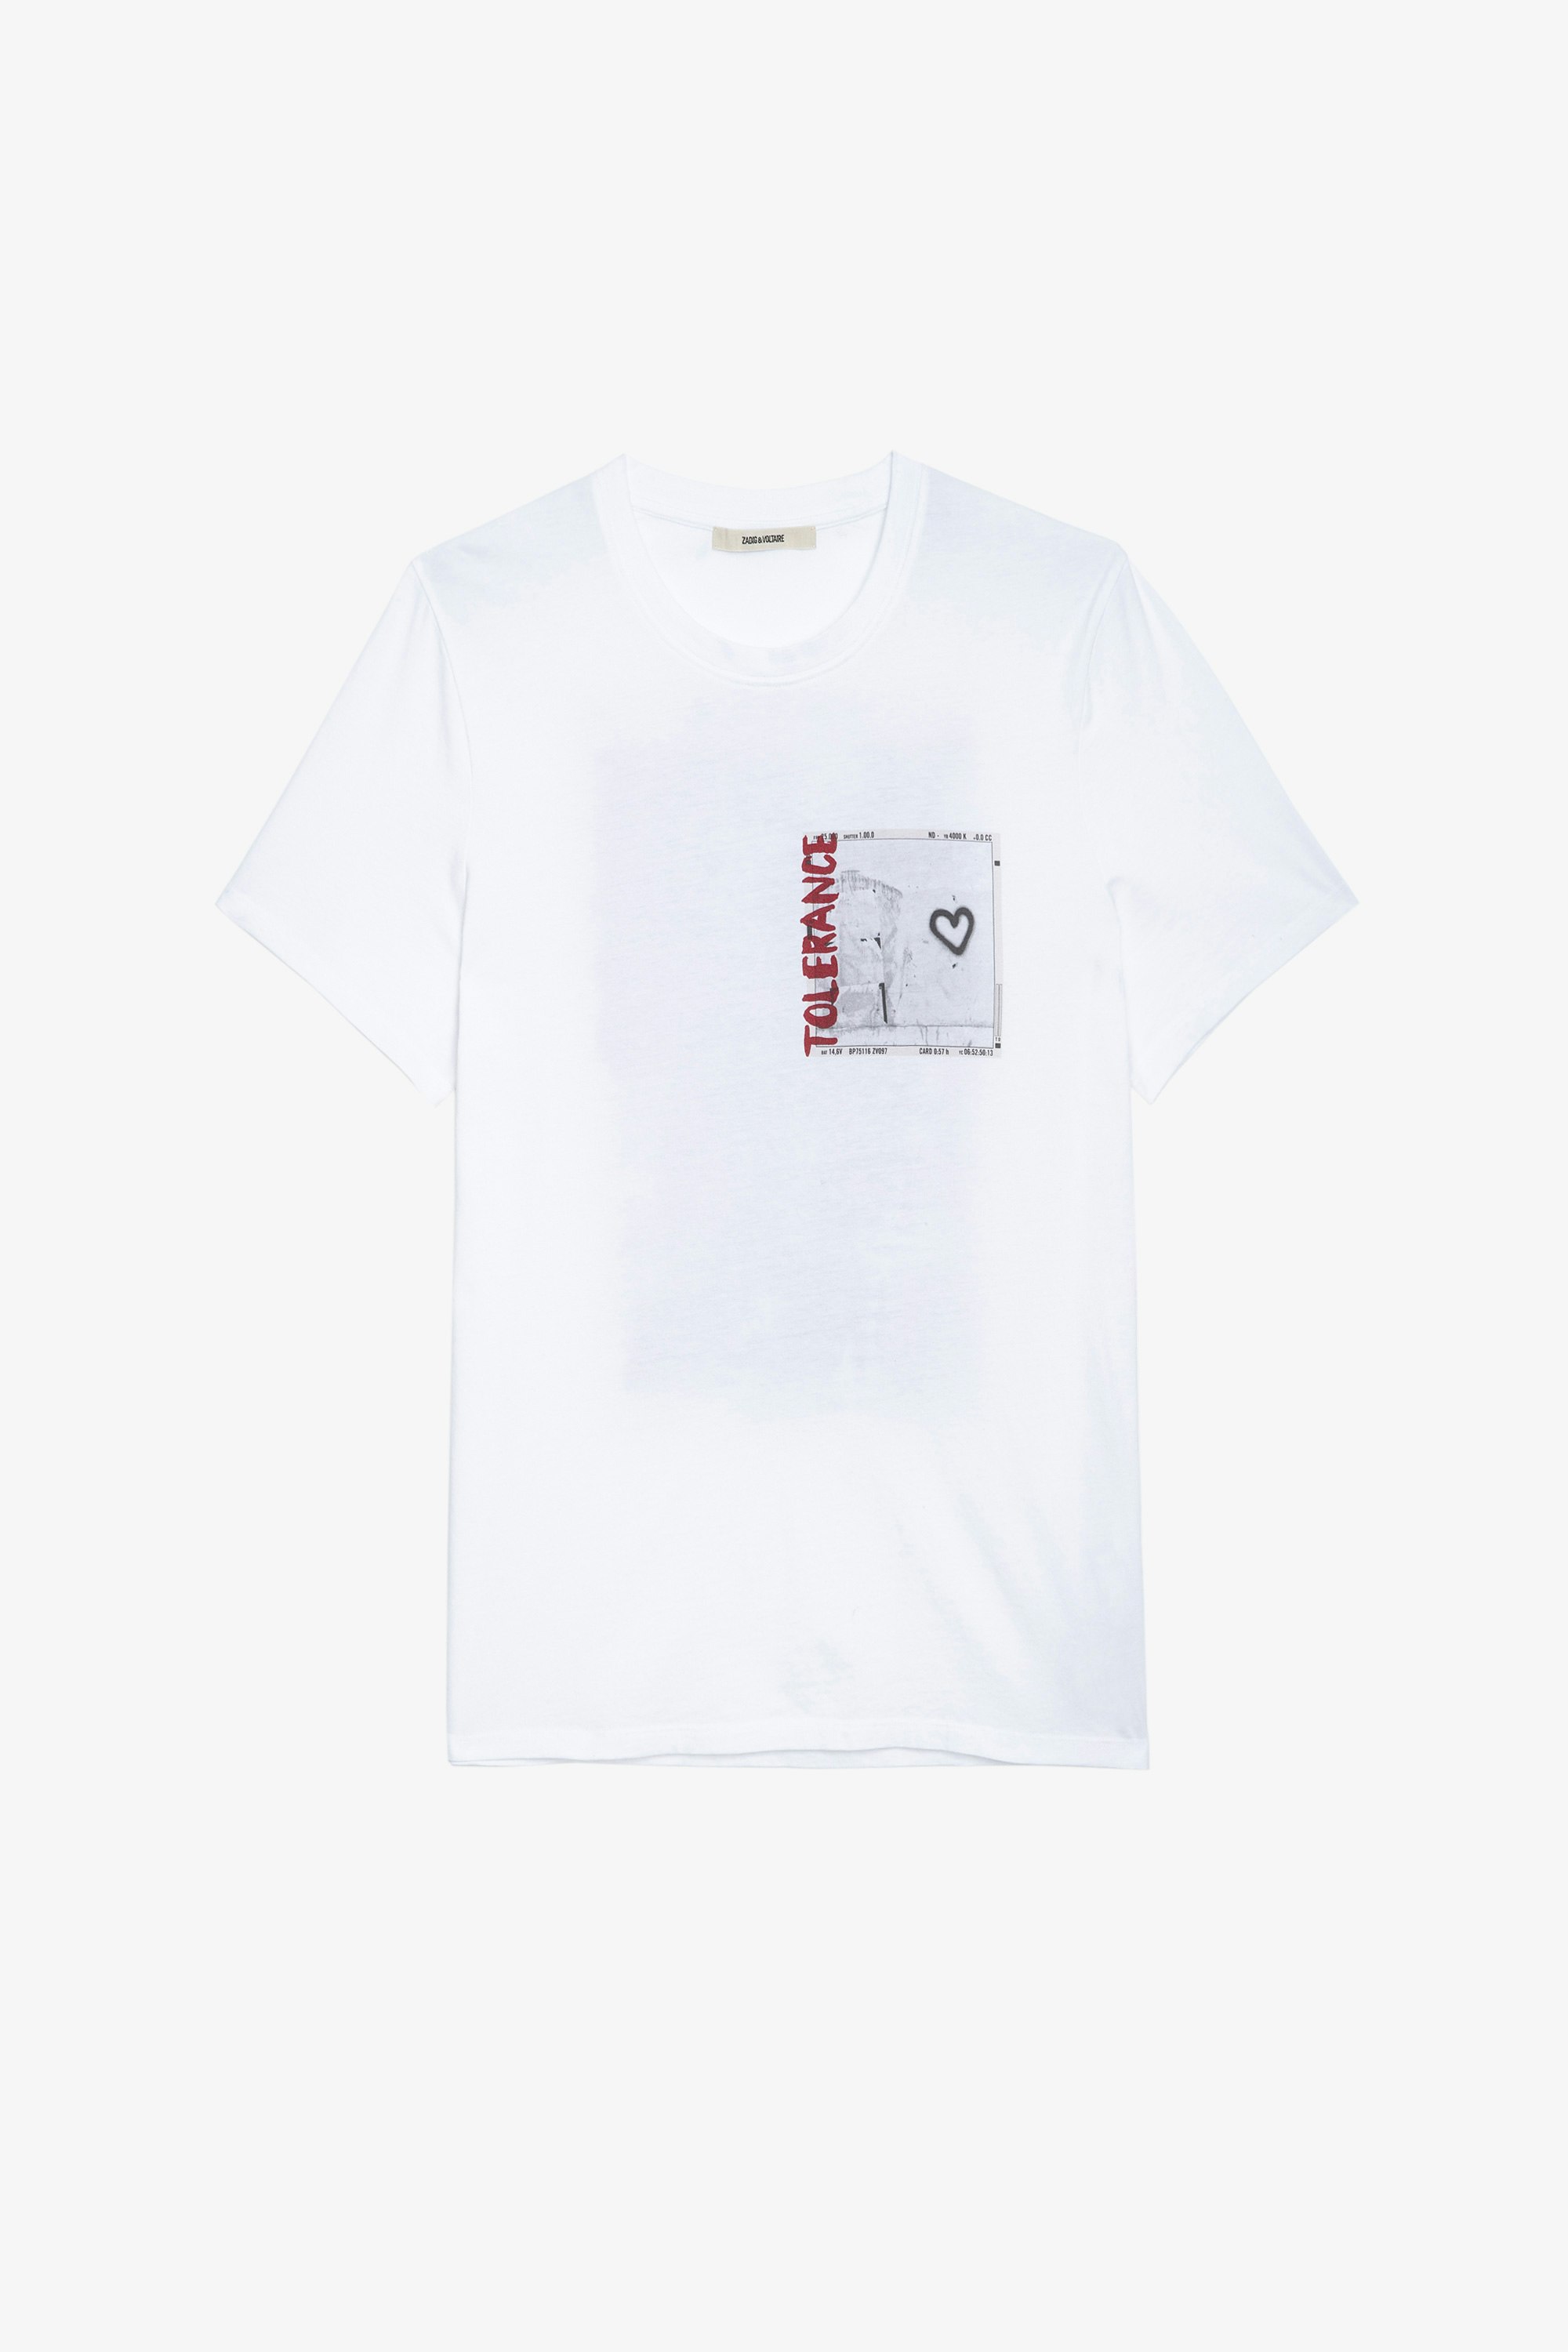 Ted フォトプリント Ｔシャツ Men's white cotton T-shirt with photoprint